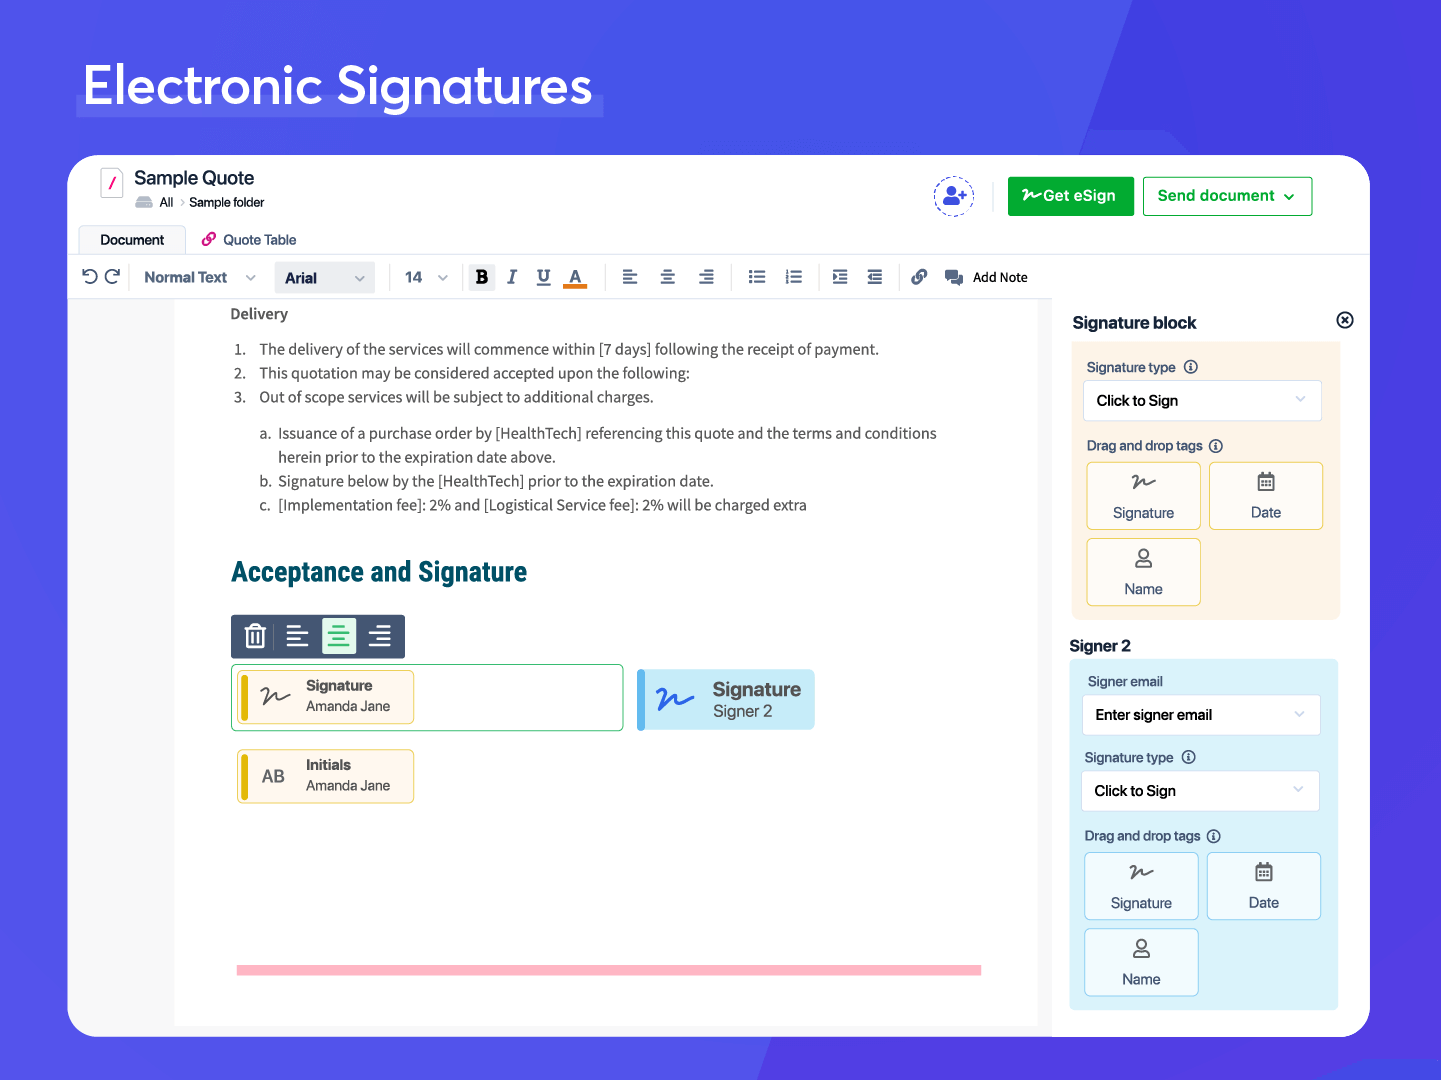 Revv Software - ELECTRONIC SIGNATURES - Add signature blocks and signer details to request eSignatures on your documents. Recipients get notified via email to fill and sign documents from their mobile or desktop.